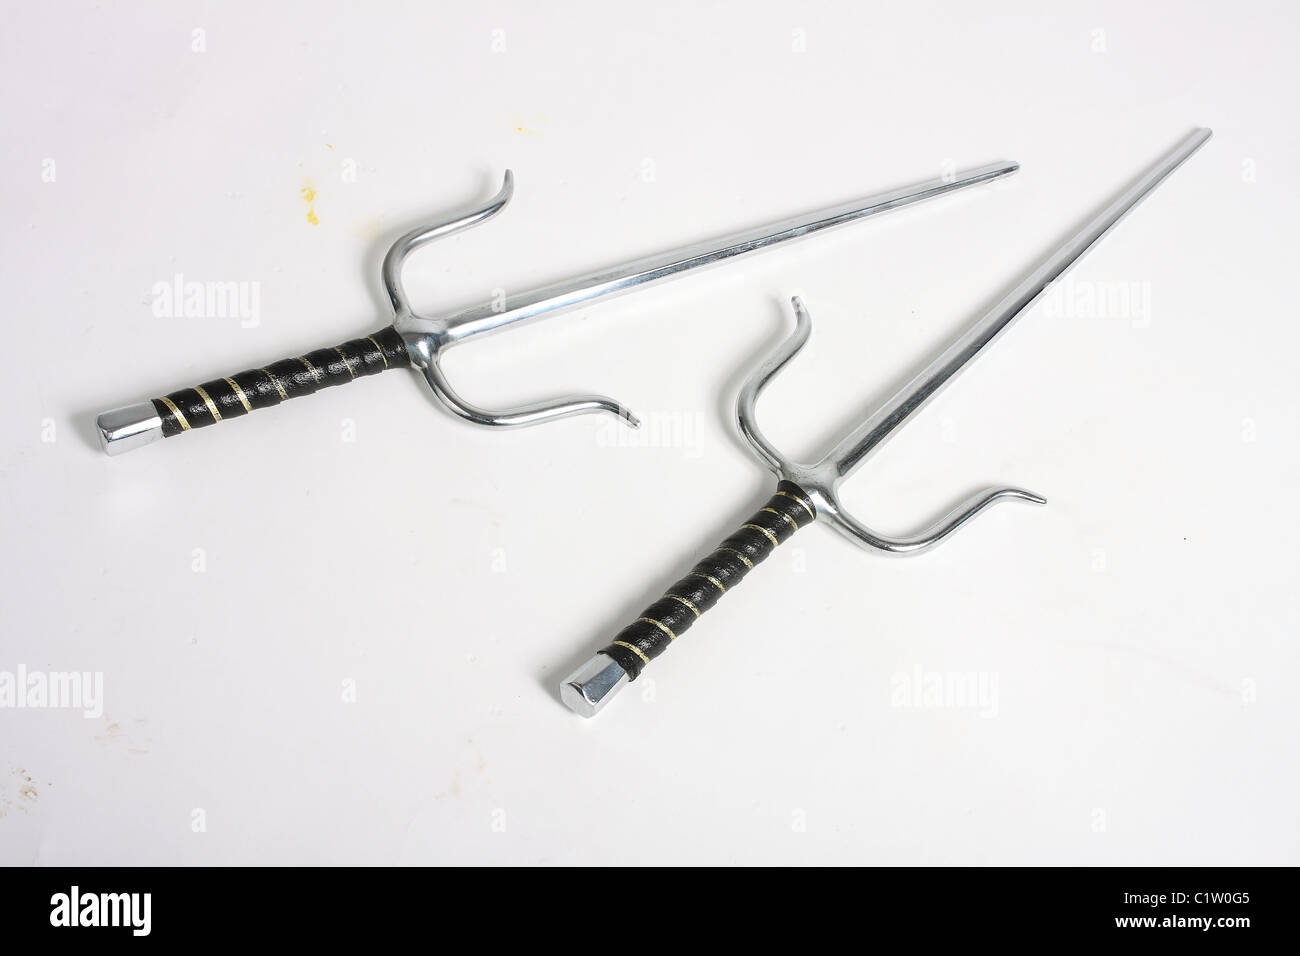 A pair of Egyptian style sai daggers; blunt for martial arts training and competitions. Stock Photo